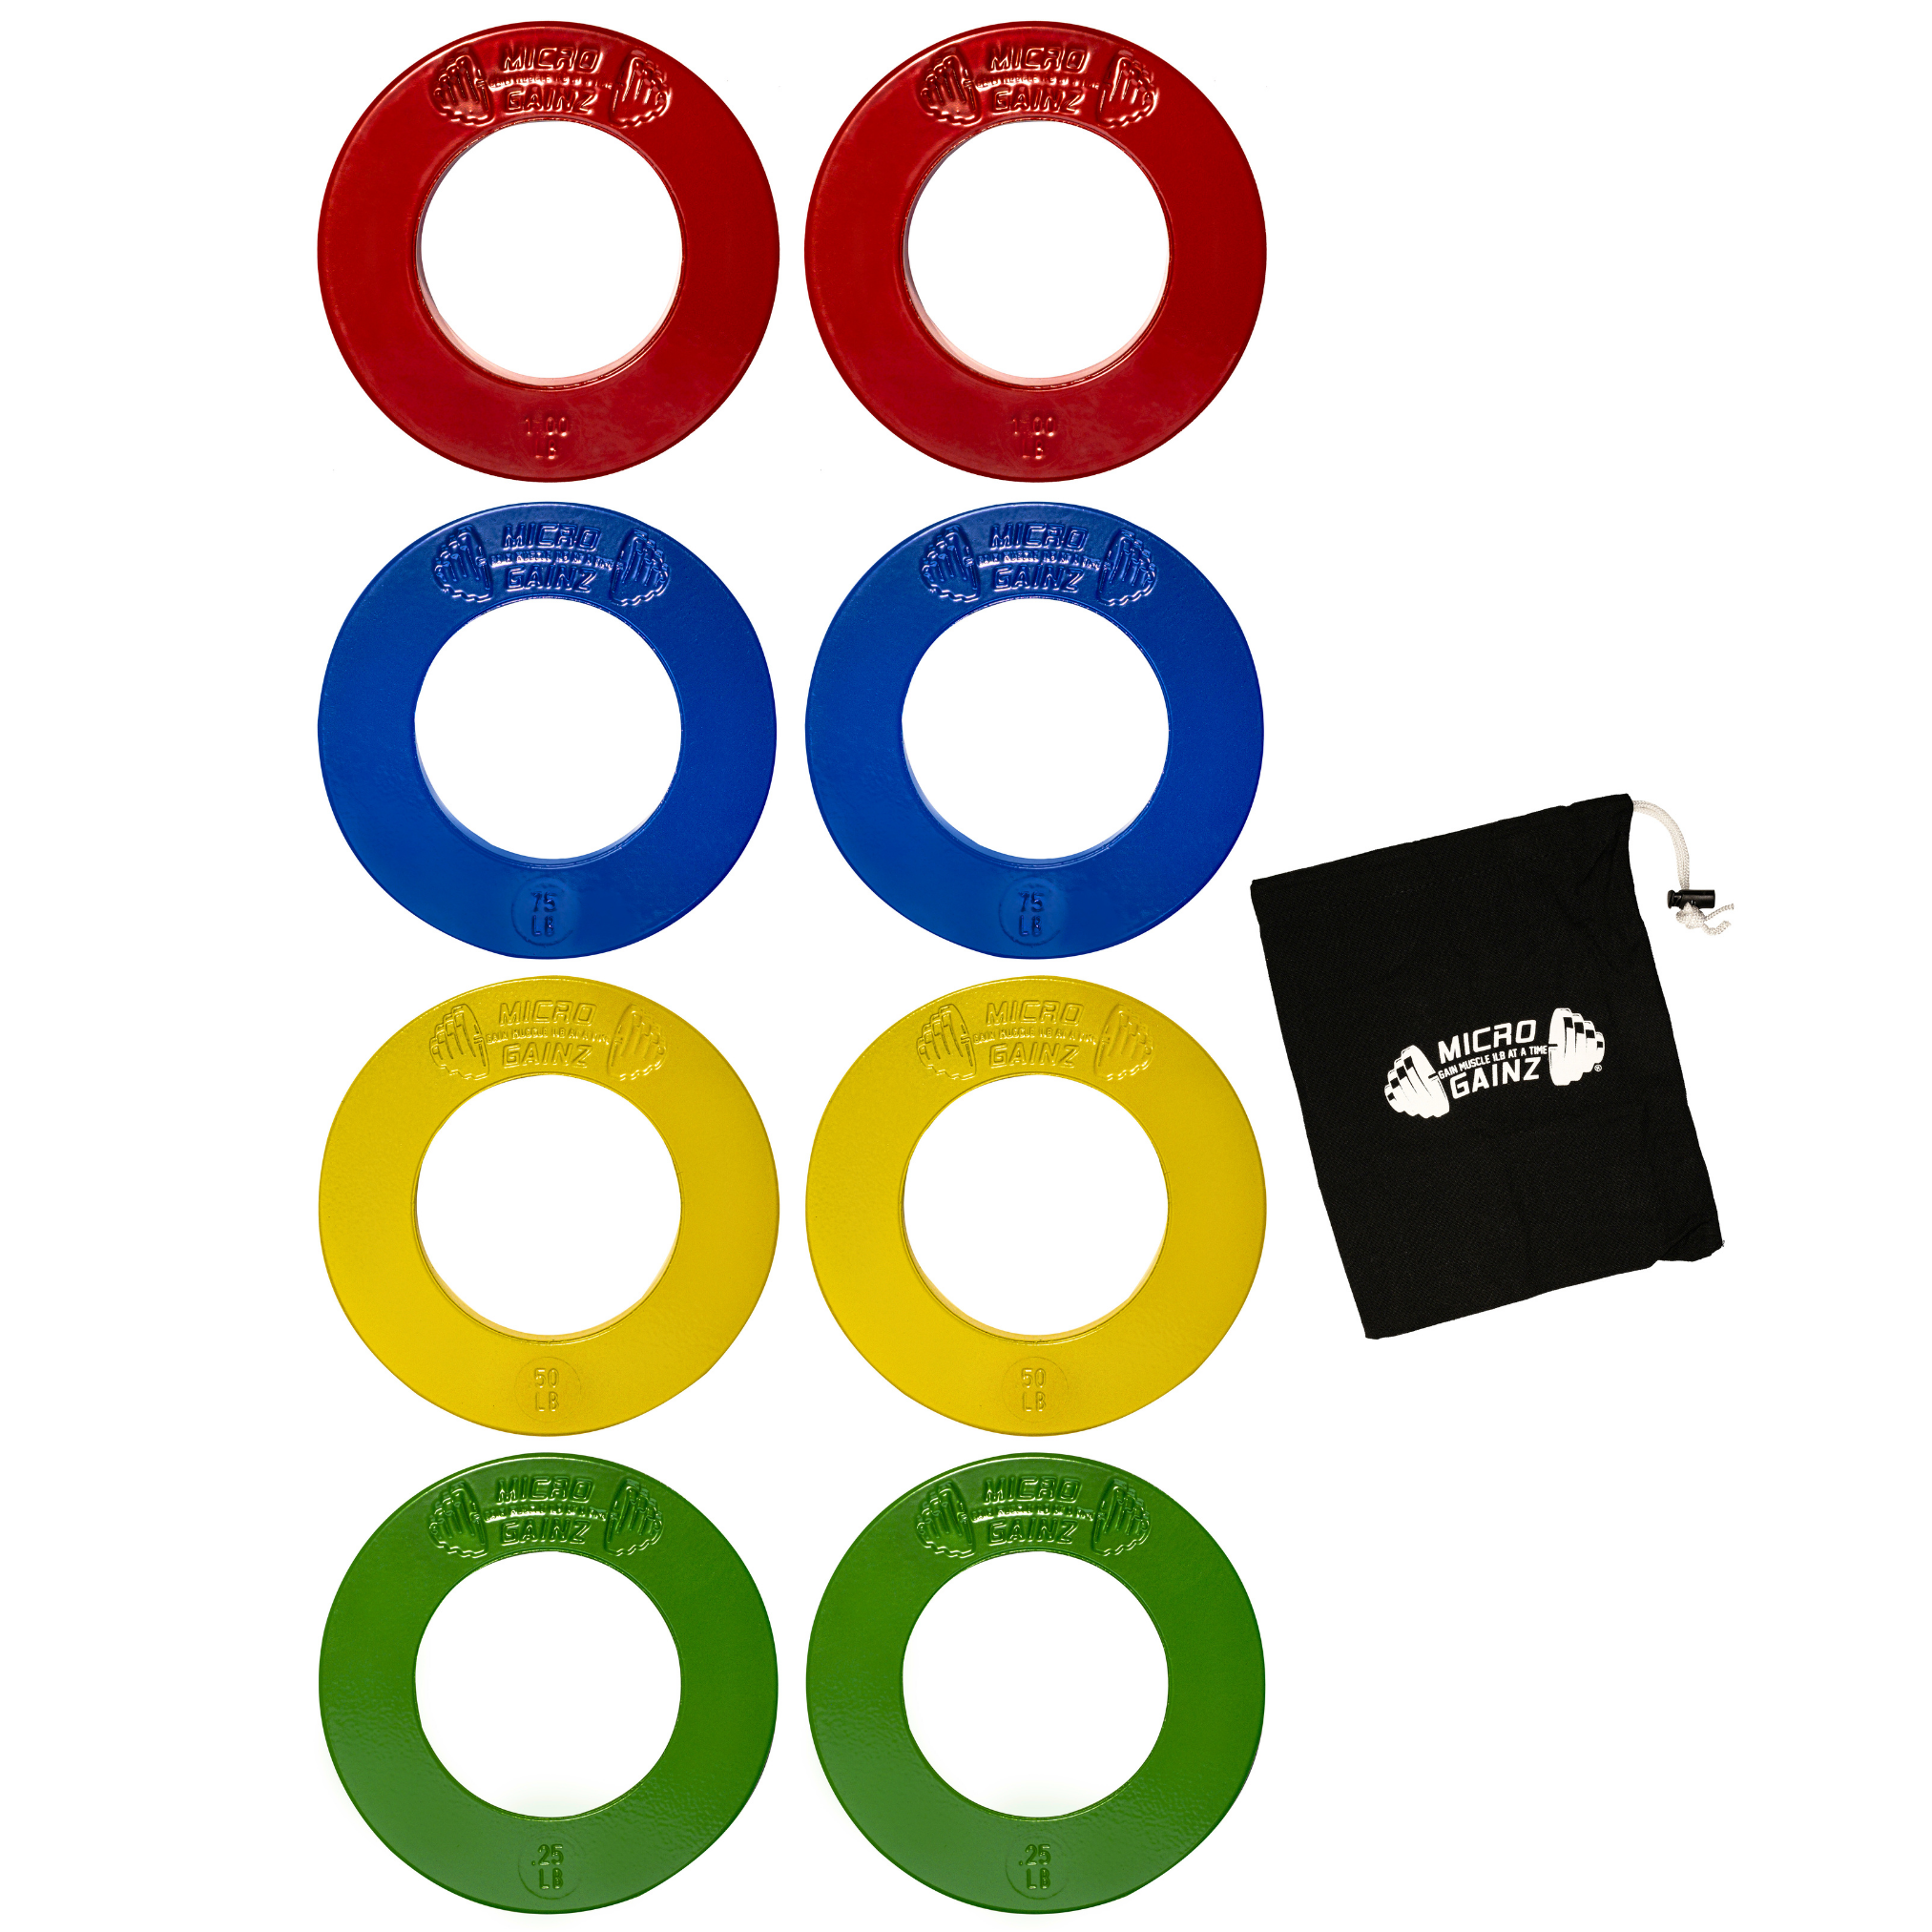 Micro Gainz Multi-Color Olympic Size Fractional Weight Plates Set of 8 Plates .25LB-1LB  w/ Bag